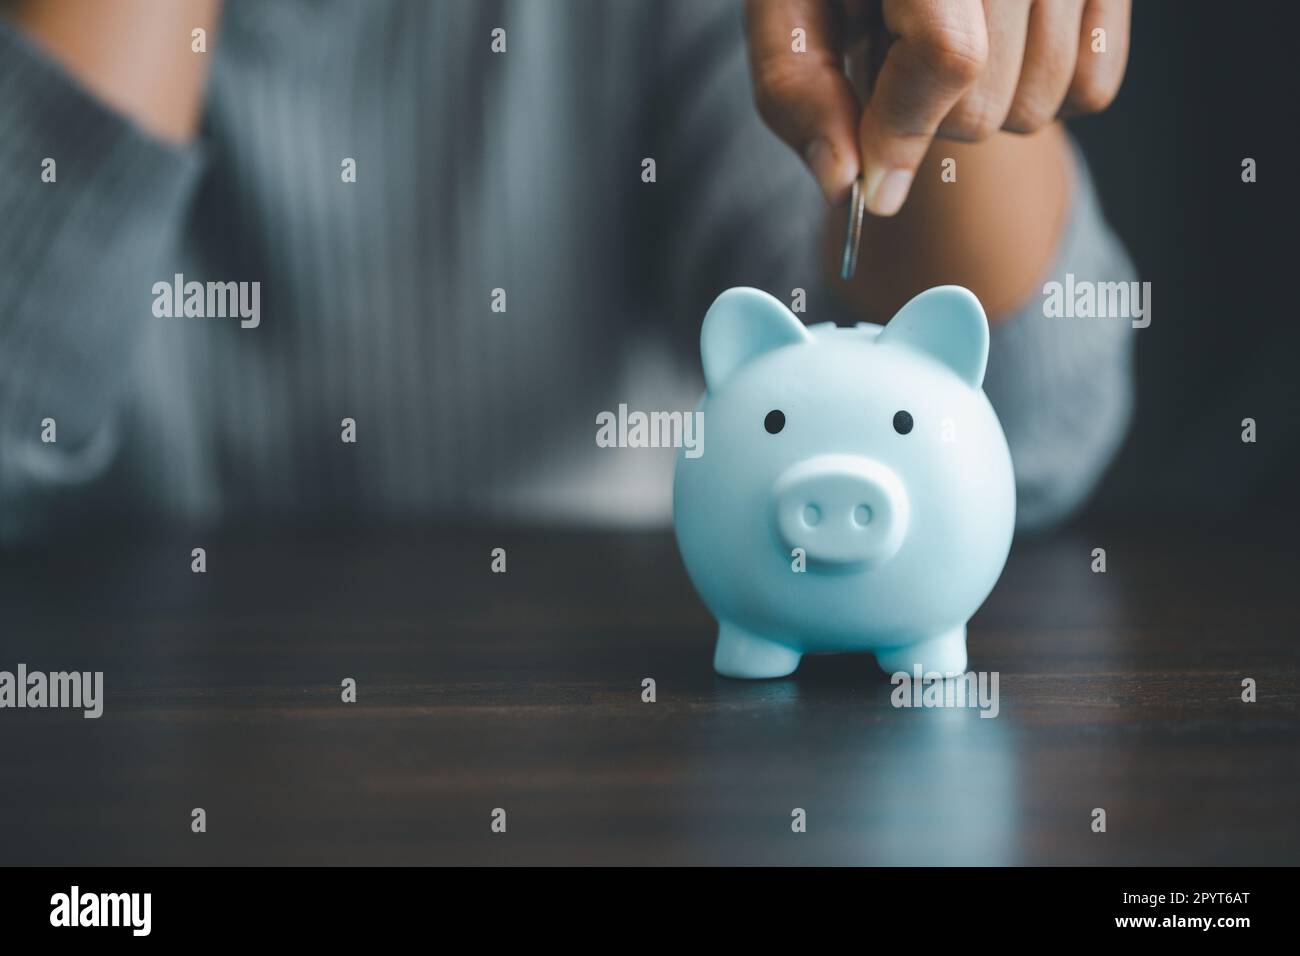 Saving investment banking finance concept. Stack of coins with piggy bank on the table. Growth of loan and investment business idea. Asset Management, Stock Photo